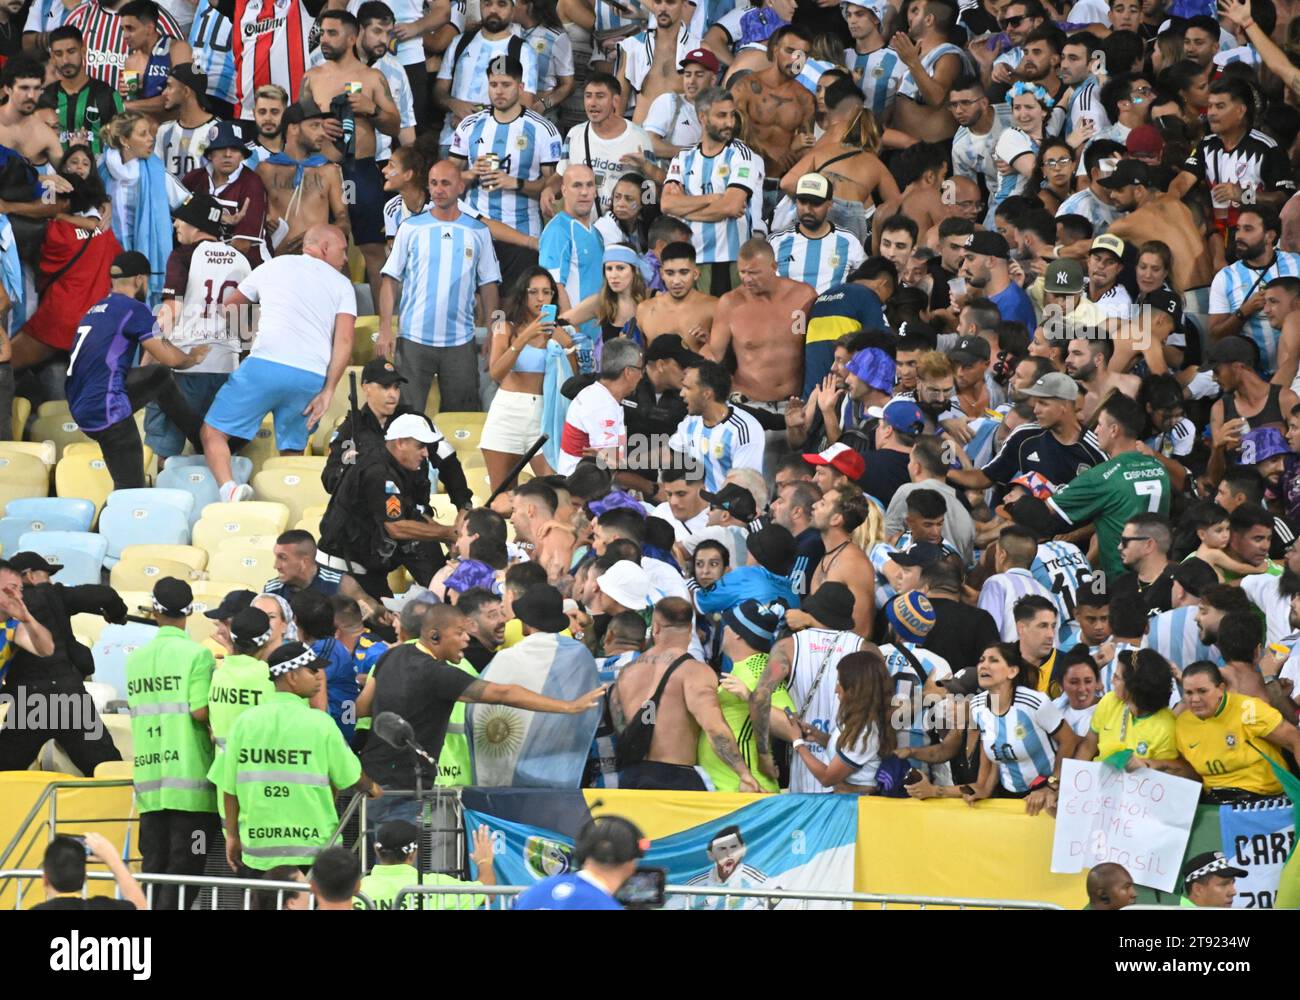 Rio de Janeiro-Brazil, November 21, 2023, supporters of the Brazilian football team fight with supporters of the Argentine national team, during the match between the teams at the Maracanã stadium. Police fight with fans Credit: Andre Paes/Alamy Live News Stock Photo